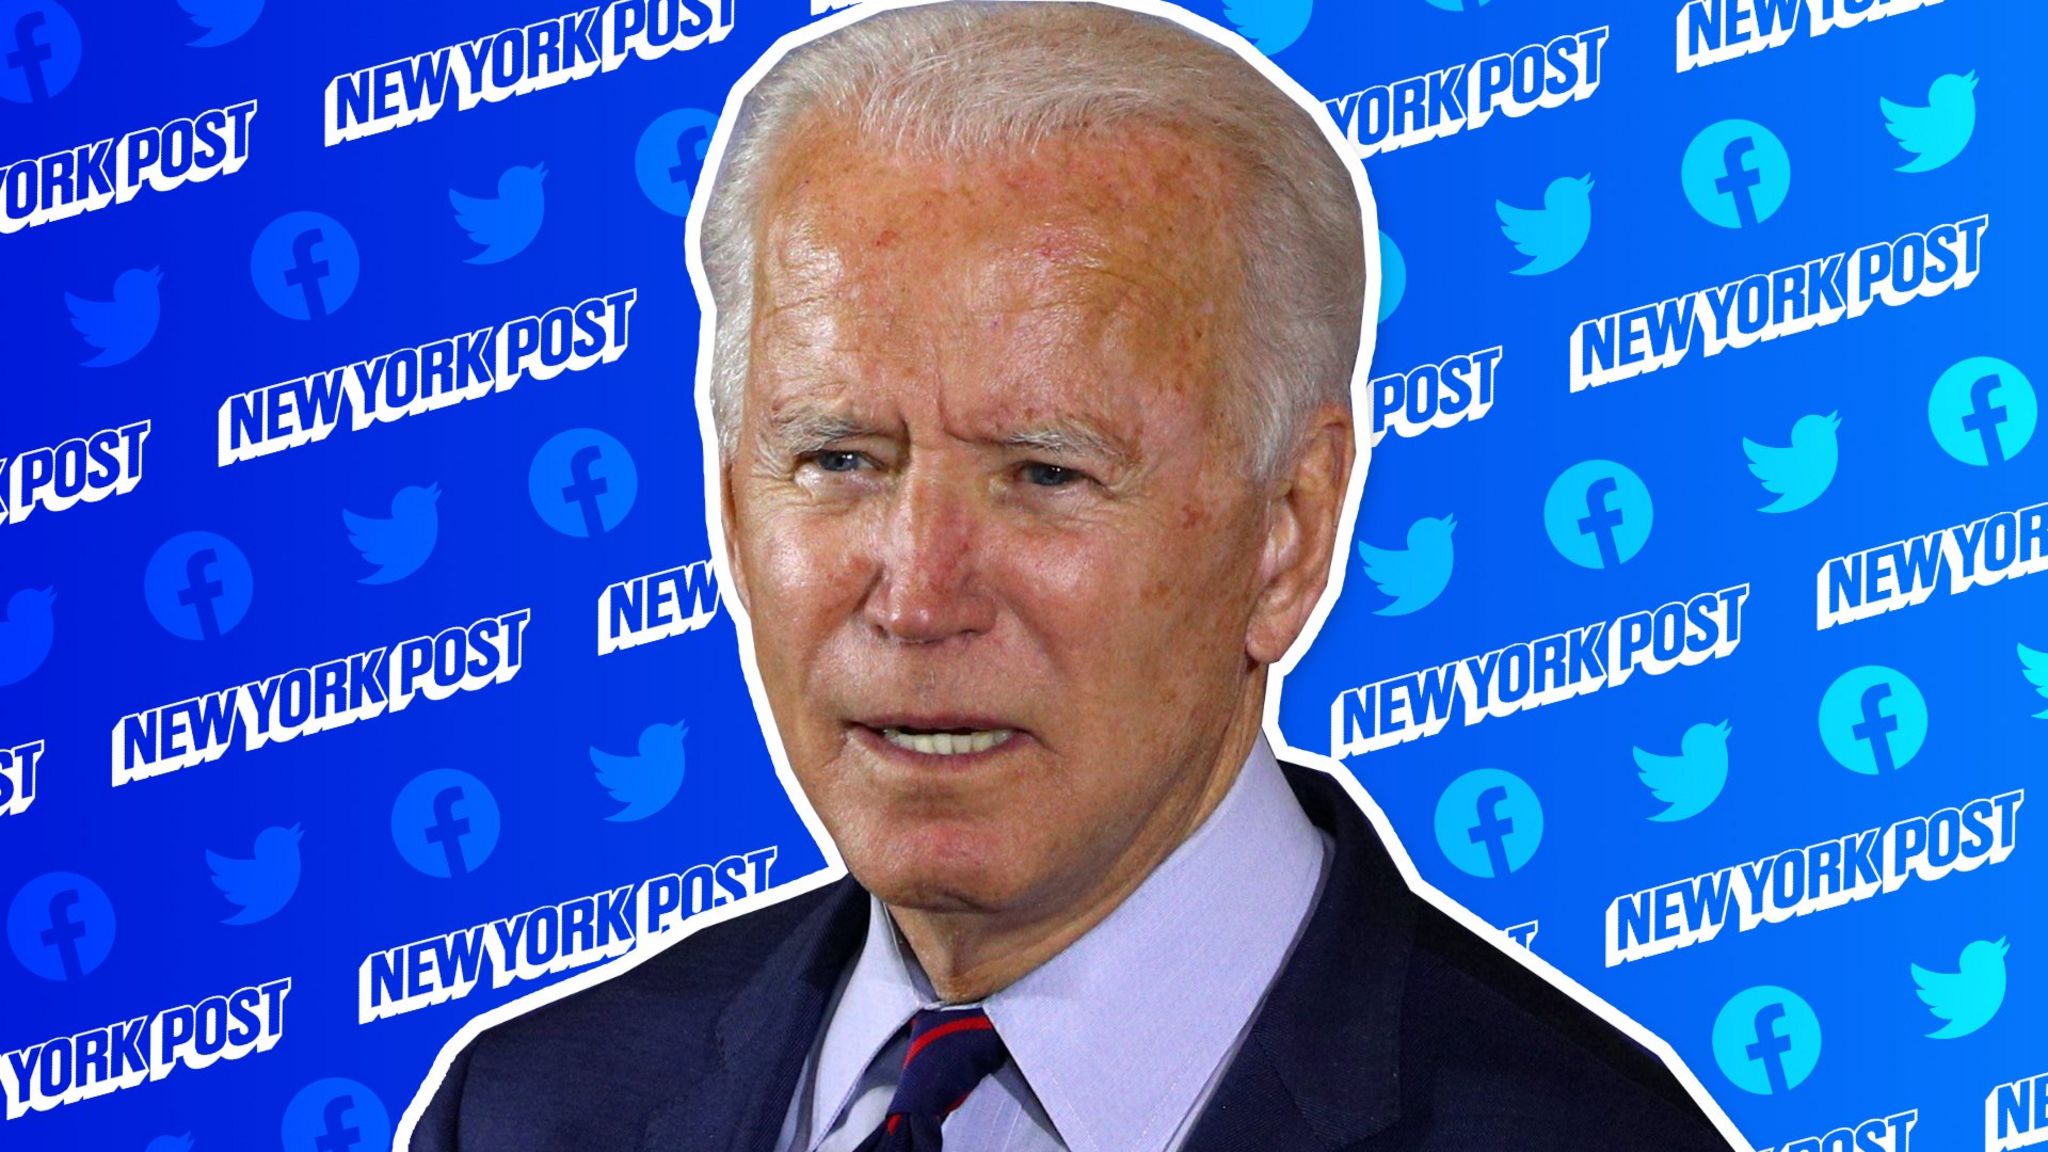 Twitter and Facebook's action over Joe Biden article reignites bias claims  - BBC News